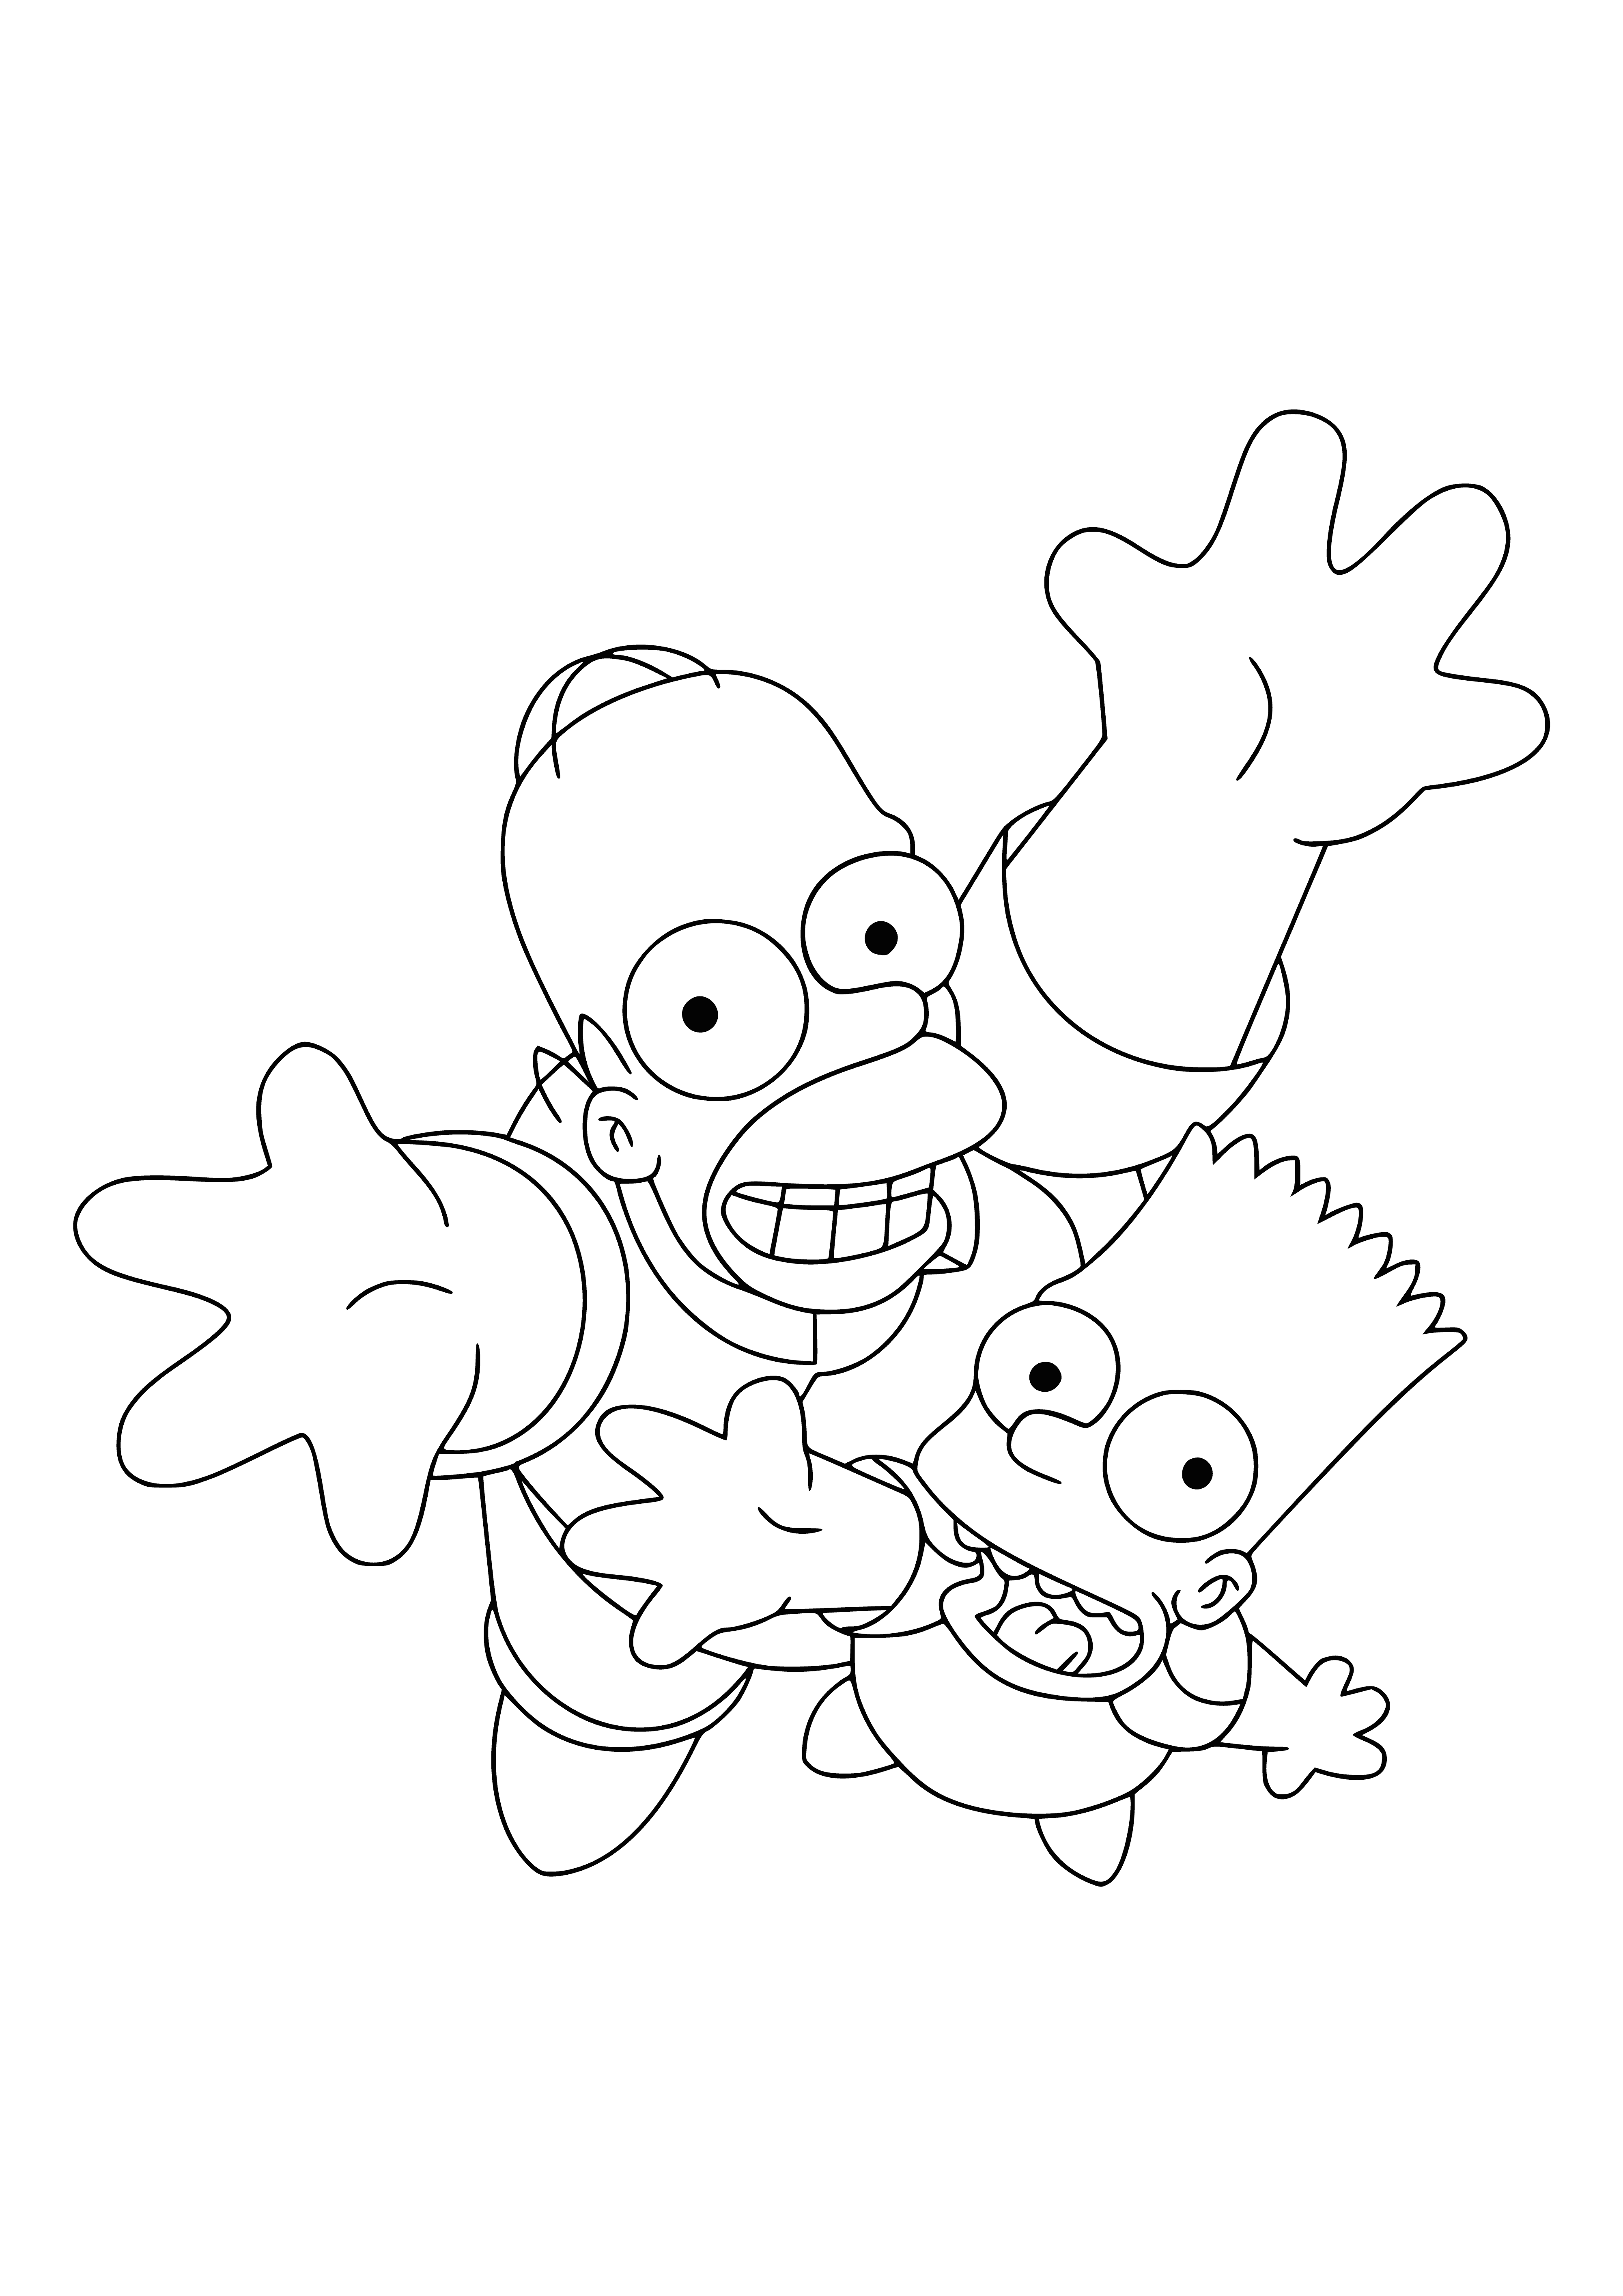 Homer and Bart coloring page